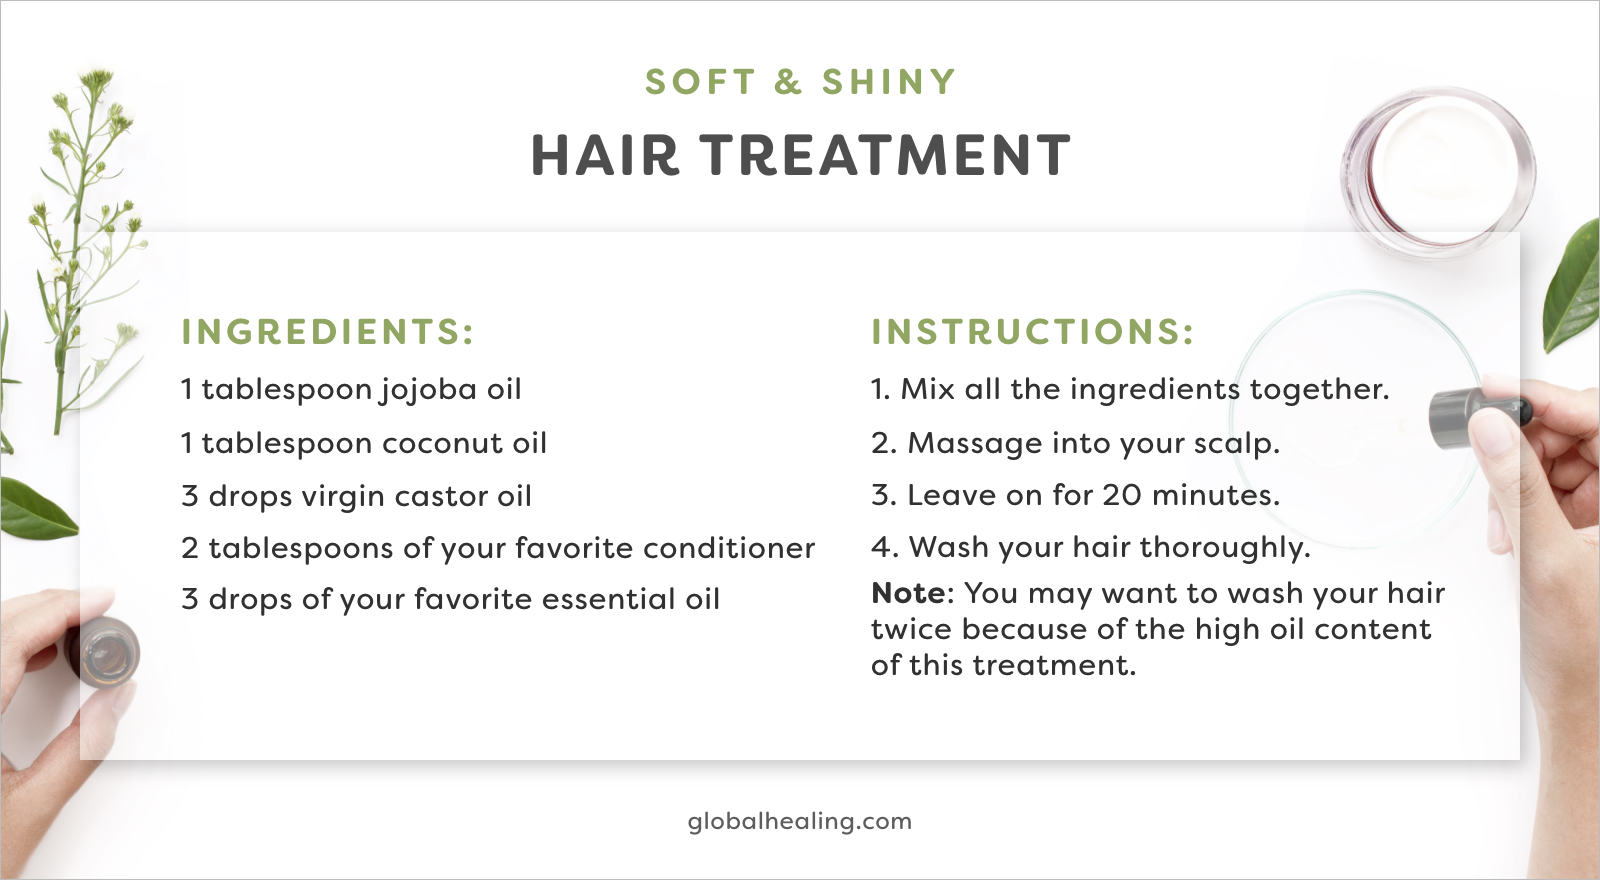 Try this hair treatment that'll make your hair feel soft, shiny, and new!